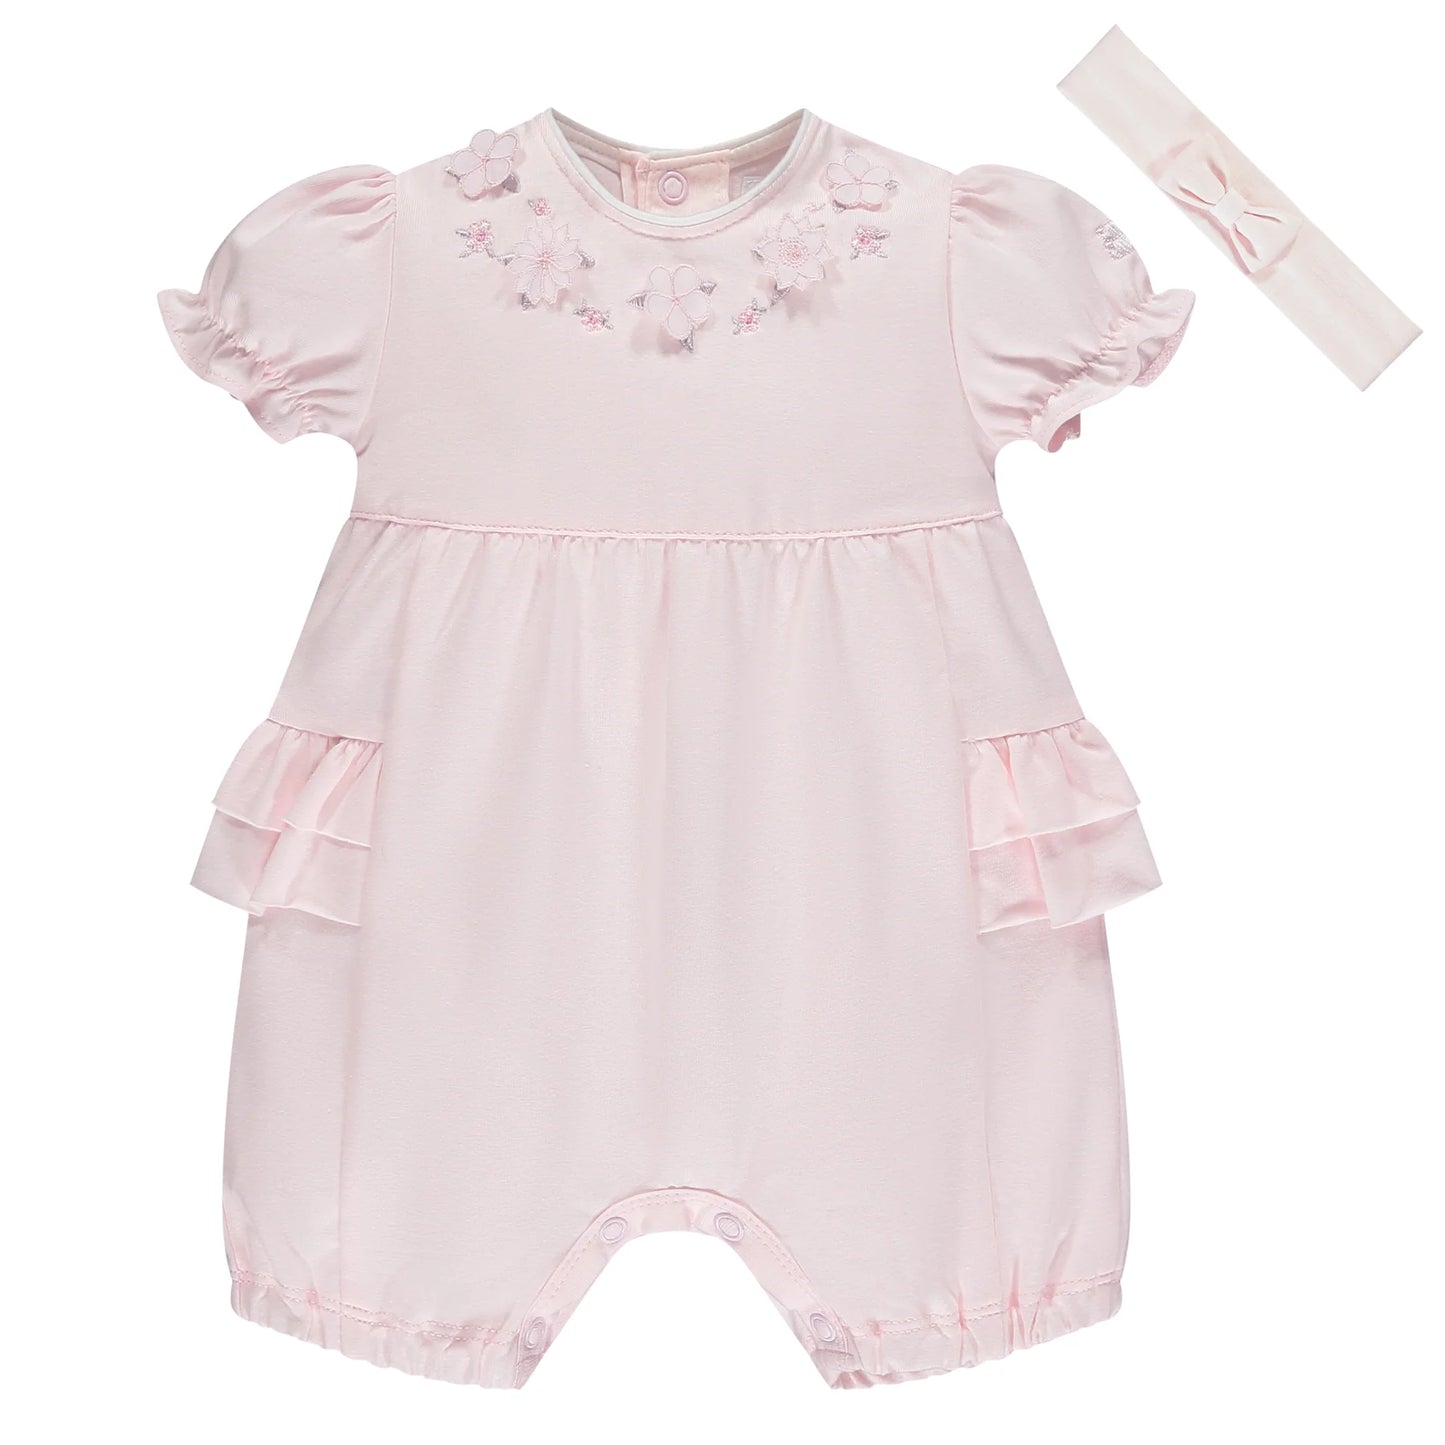 Emile et Rose Baby Girl's Pale Pink Romper With 3D Flowers & Hairband